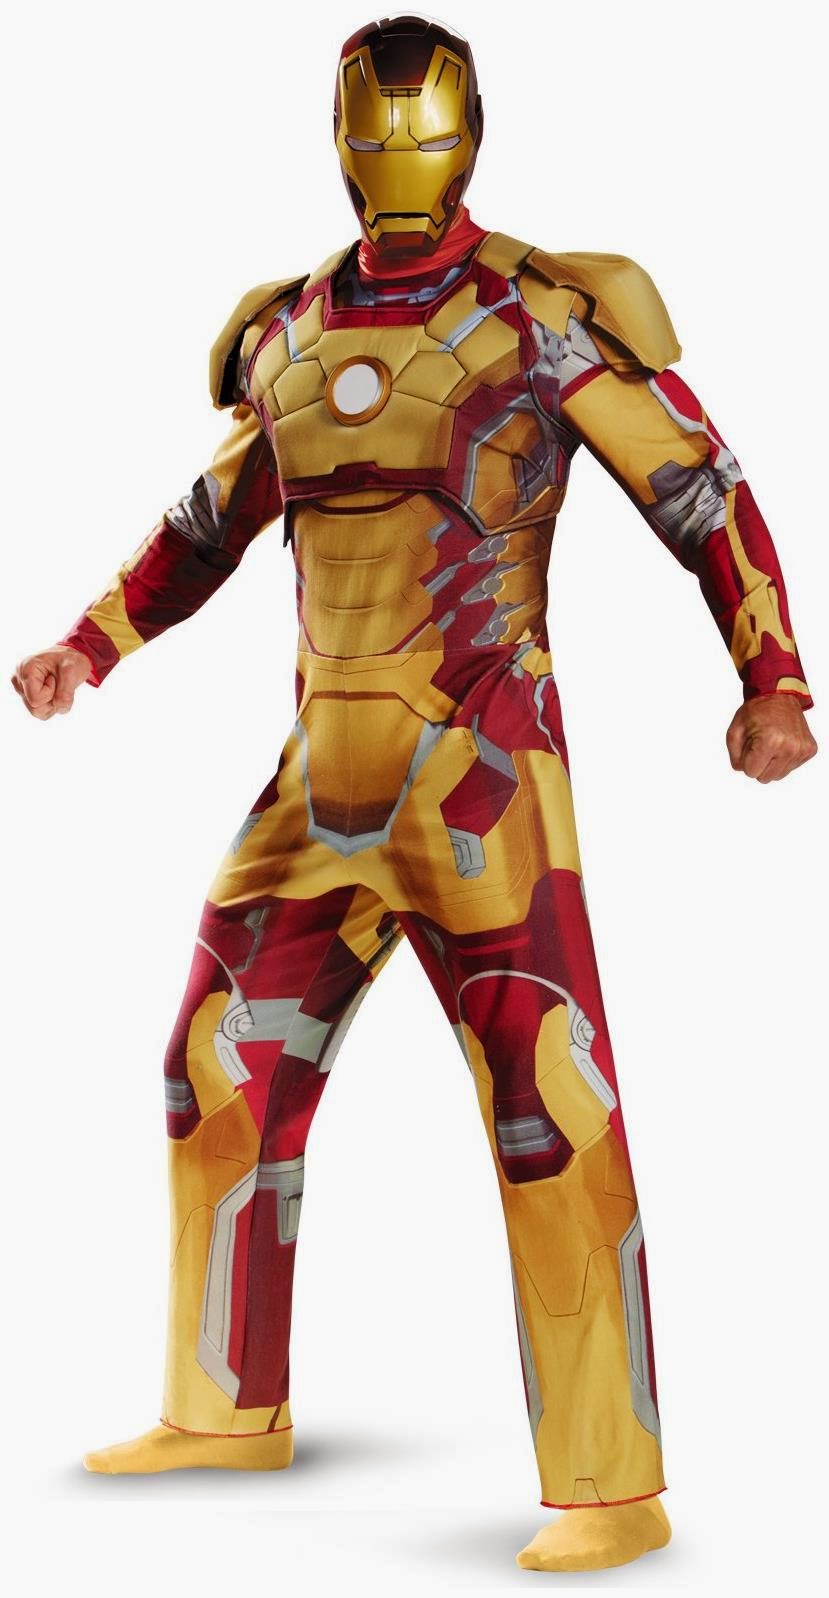 http://www.partybell.com/p-34891-iron-man-3-mark-42-deluxe-adult-costume.aspx?utm_source=Blog&utm_medium=Social&utm_campaign=iron-man-theme-party-blog